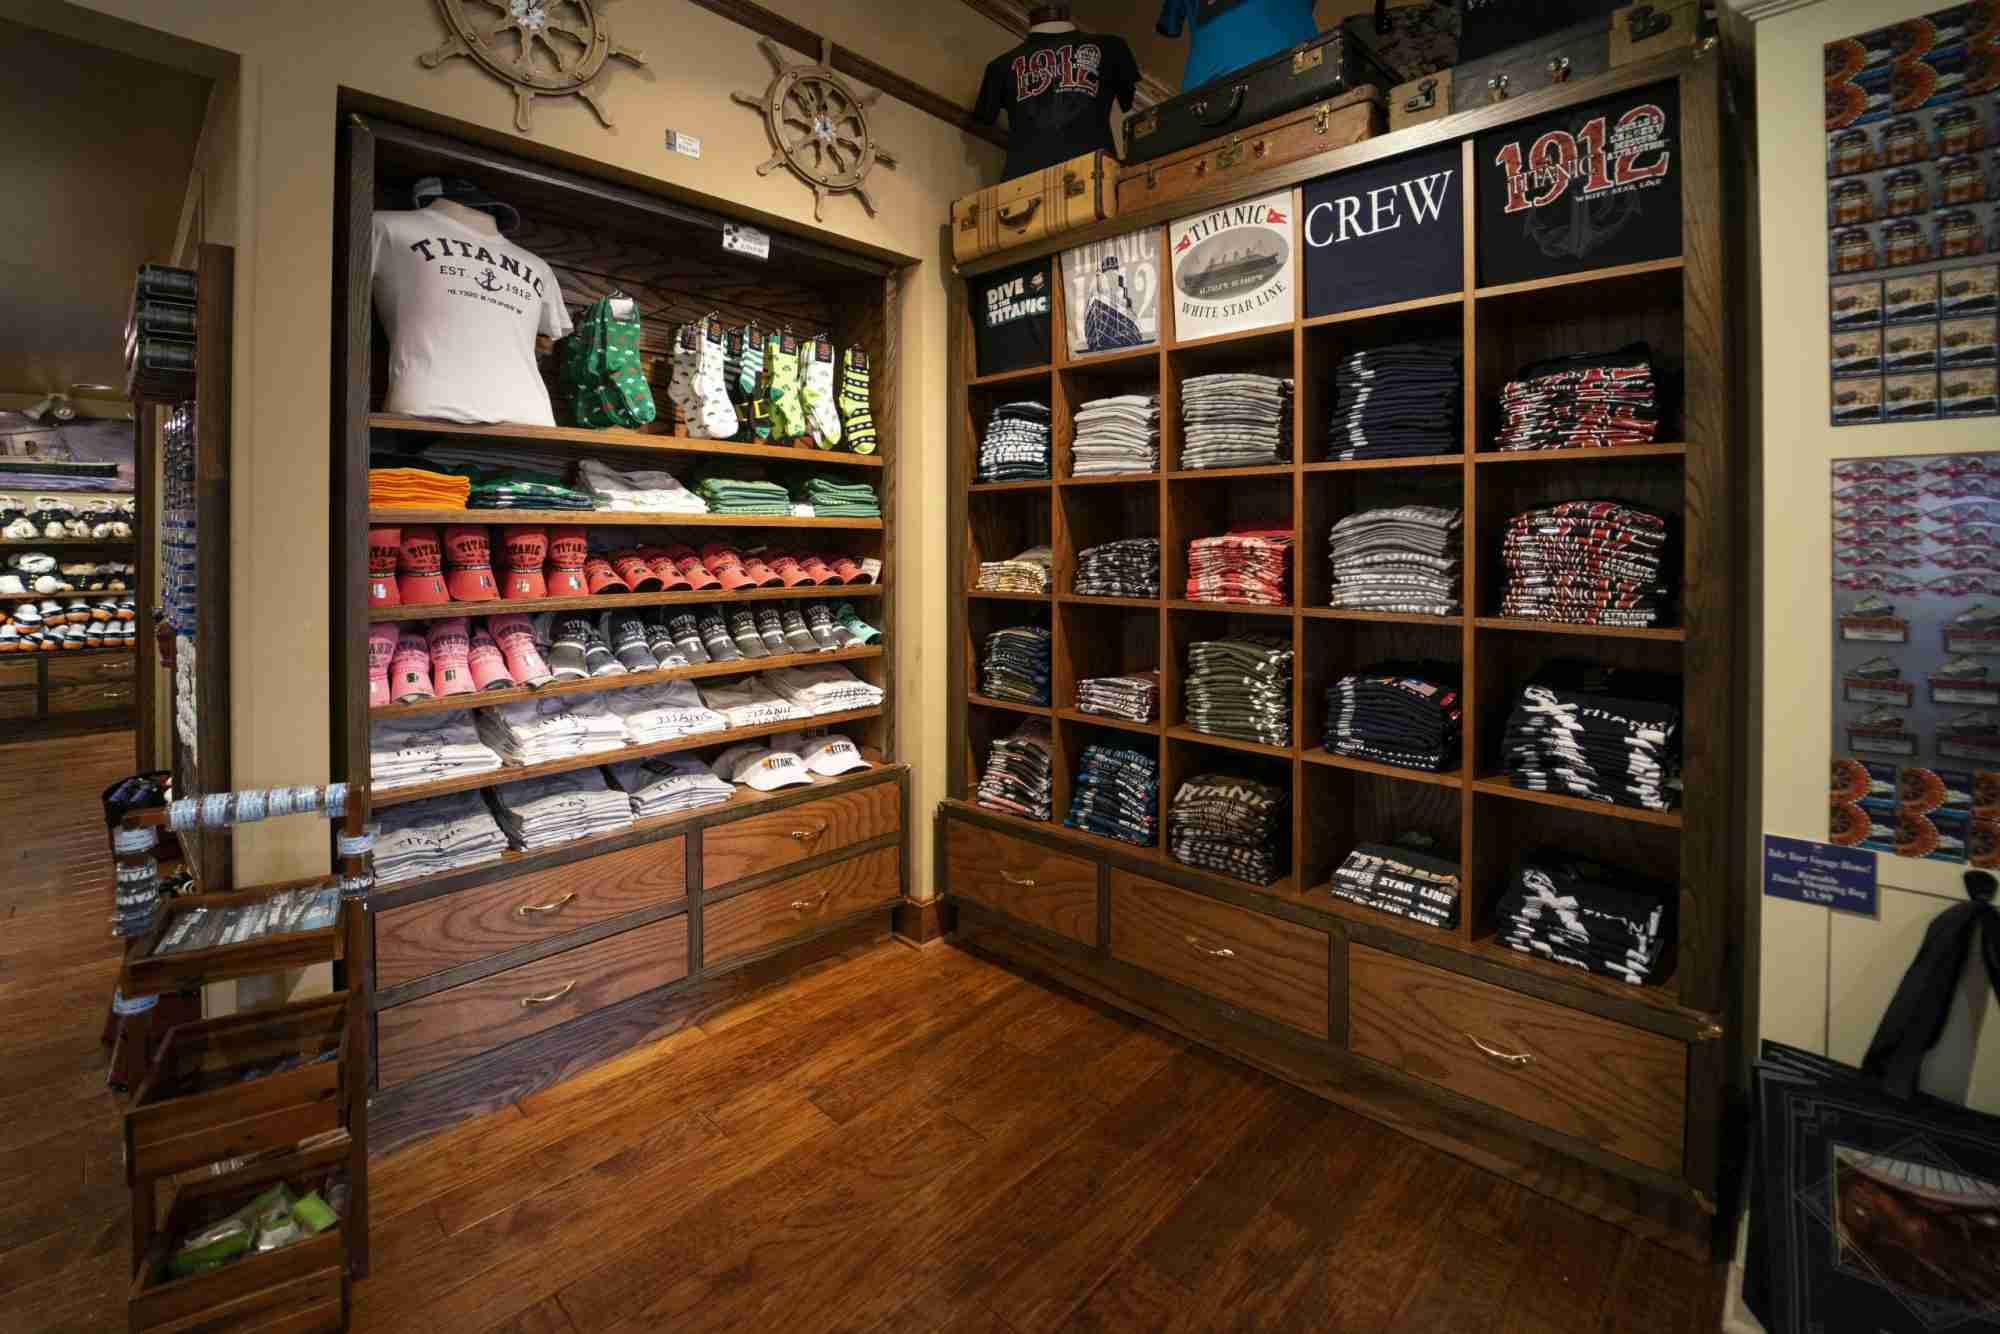 A Fun Way to Enhance a Visit for Guests – Offering Apparel at Museum Stores